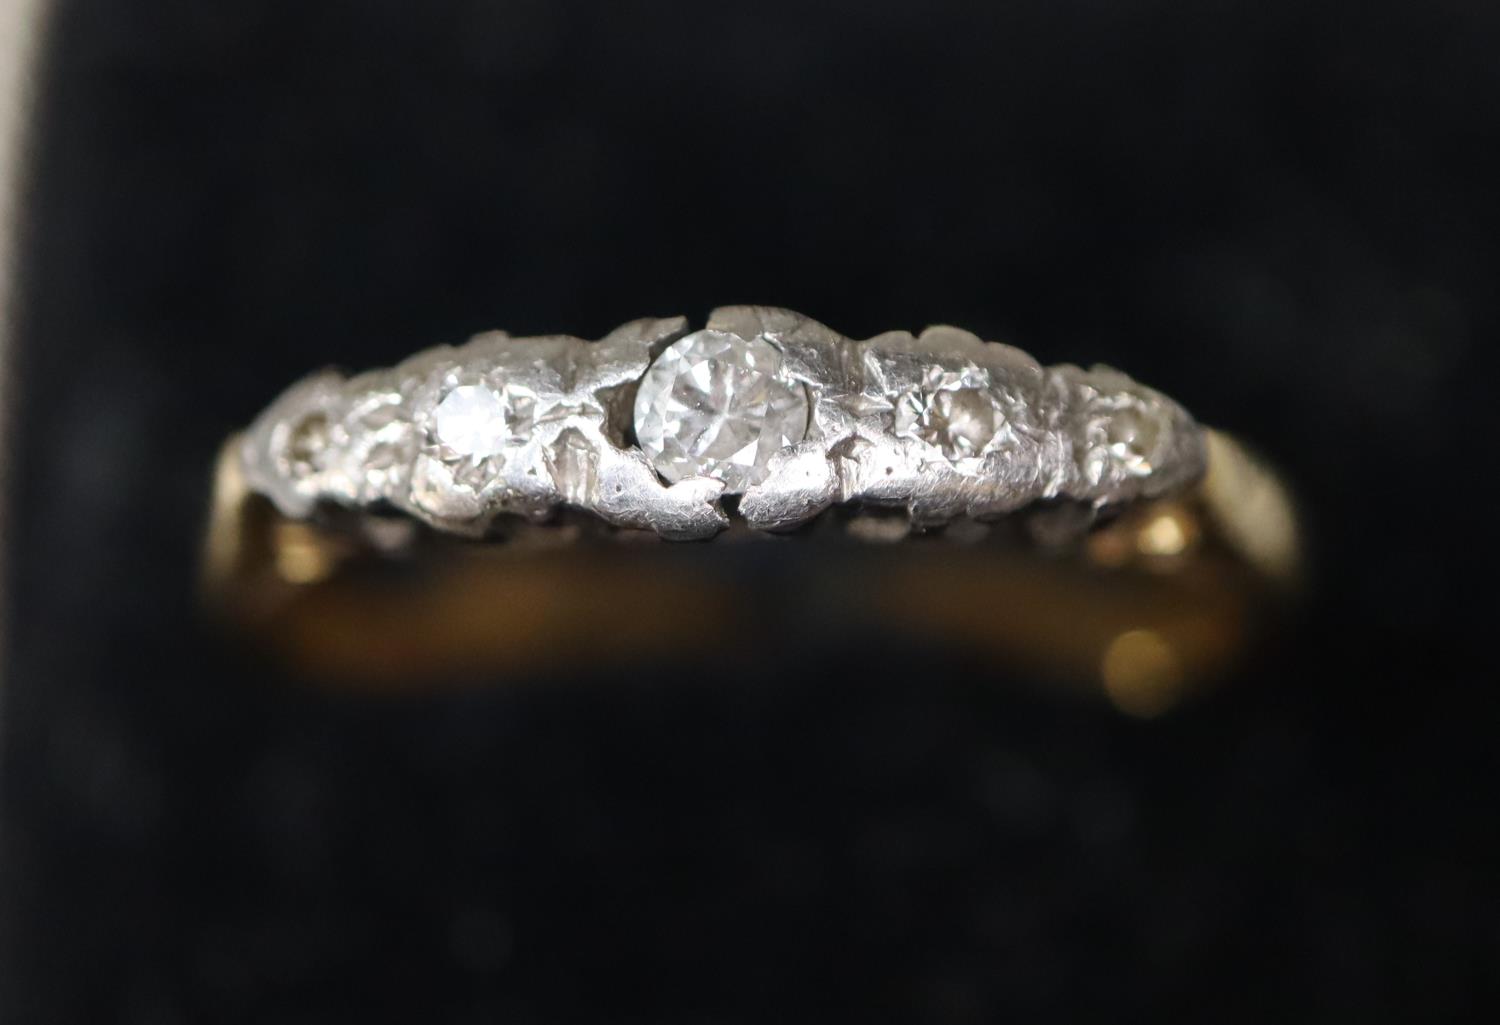 18ct gold five stone diamond ring. Ring size N. Approx weight 2.5 grams. (Setting split). (B.P.